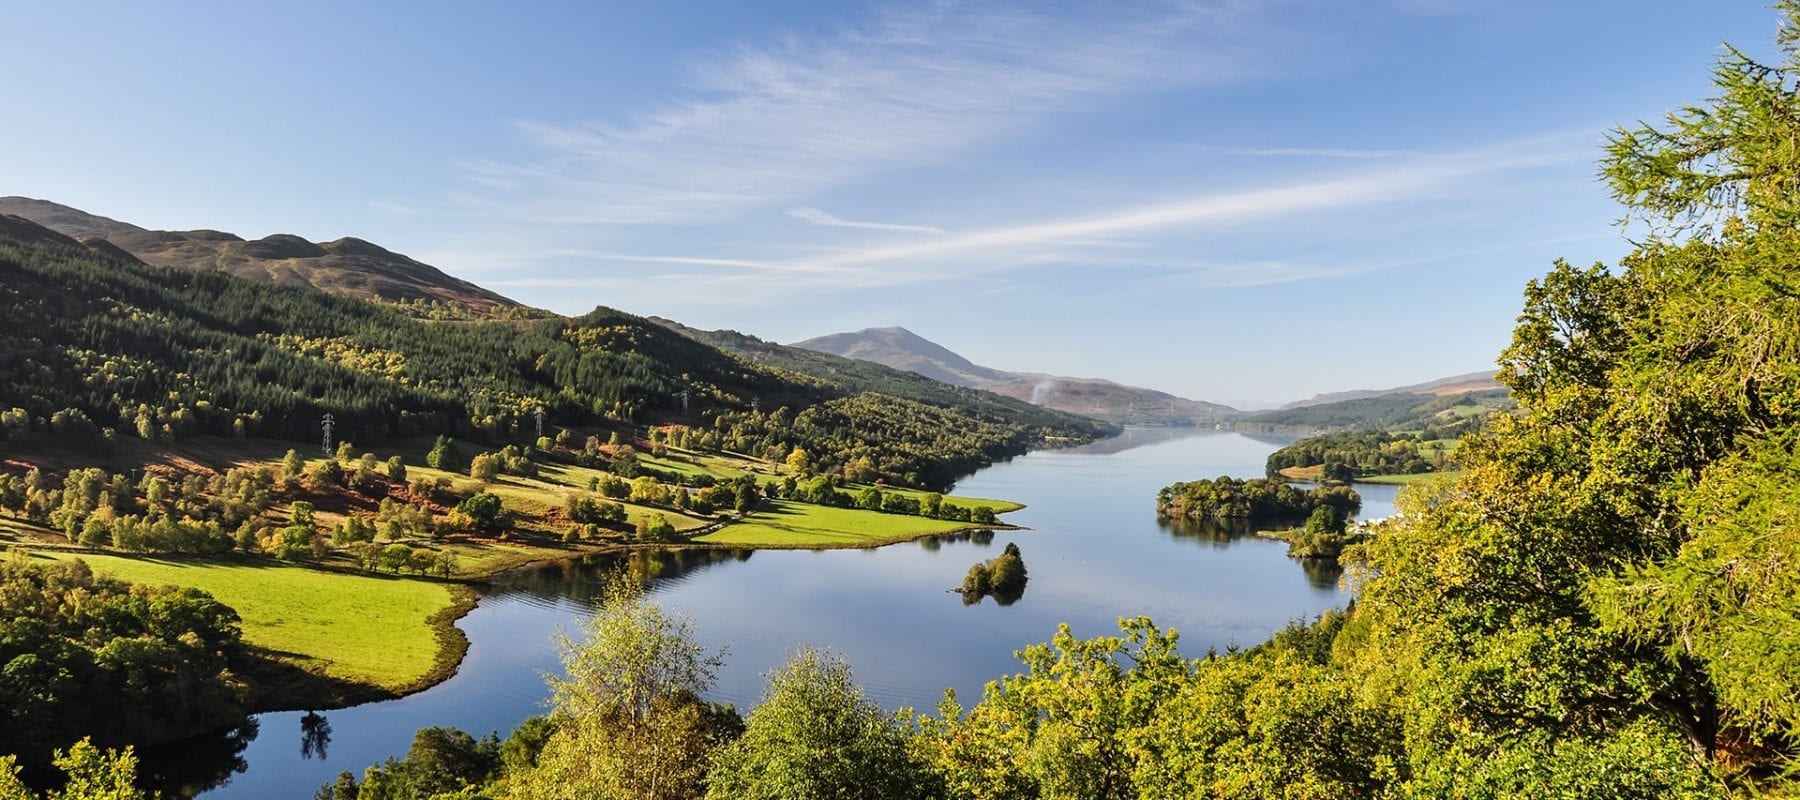 Breathe in the peace & tranquillity of Highland Perthshire at its finest